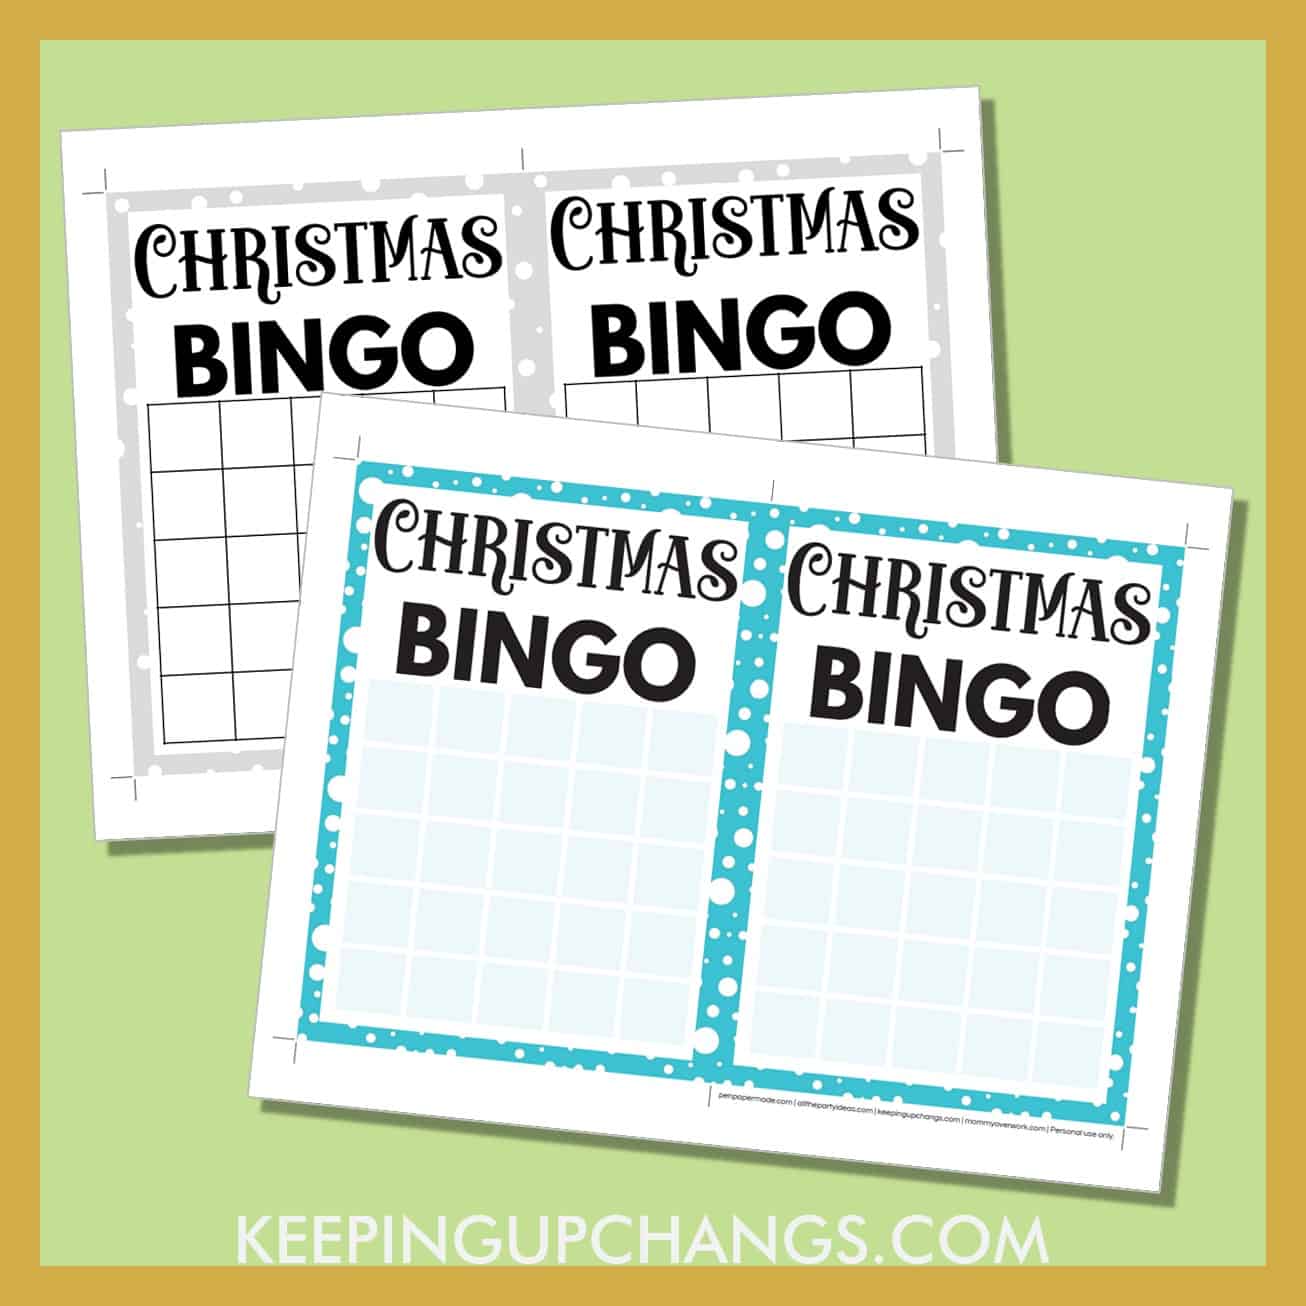 free christmas bingo 5x5 grid game board blank template in color, black and white.